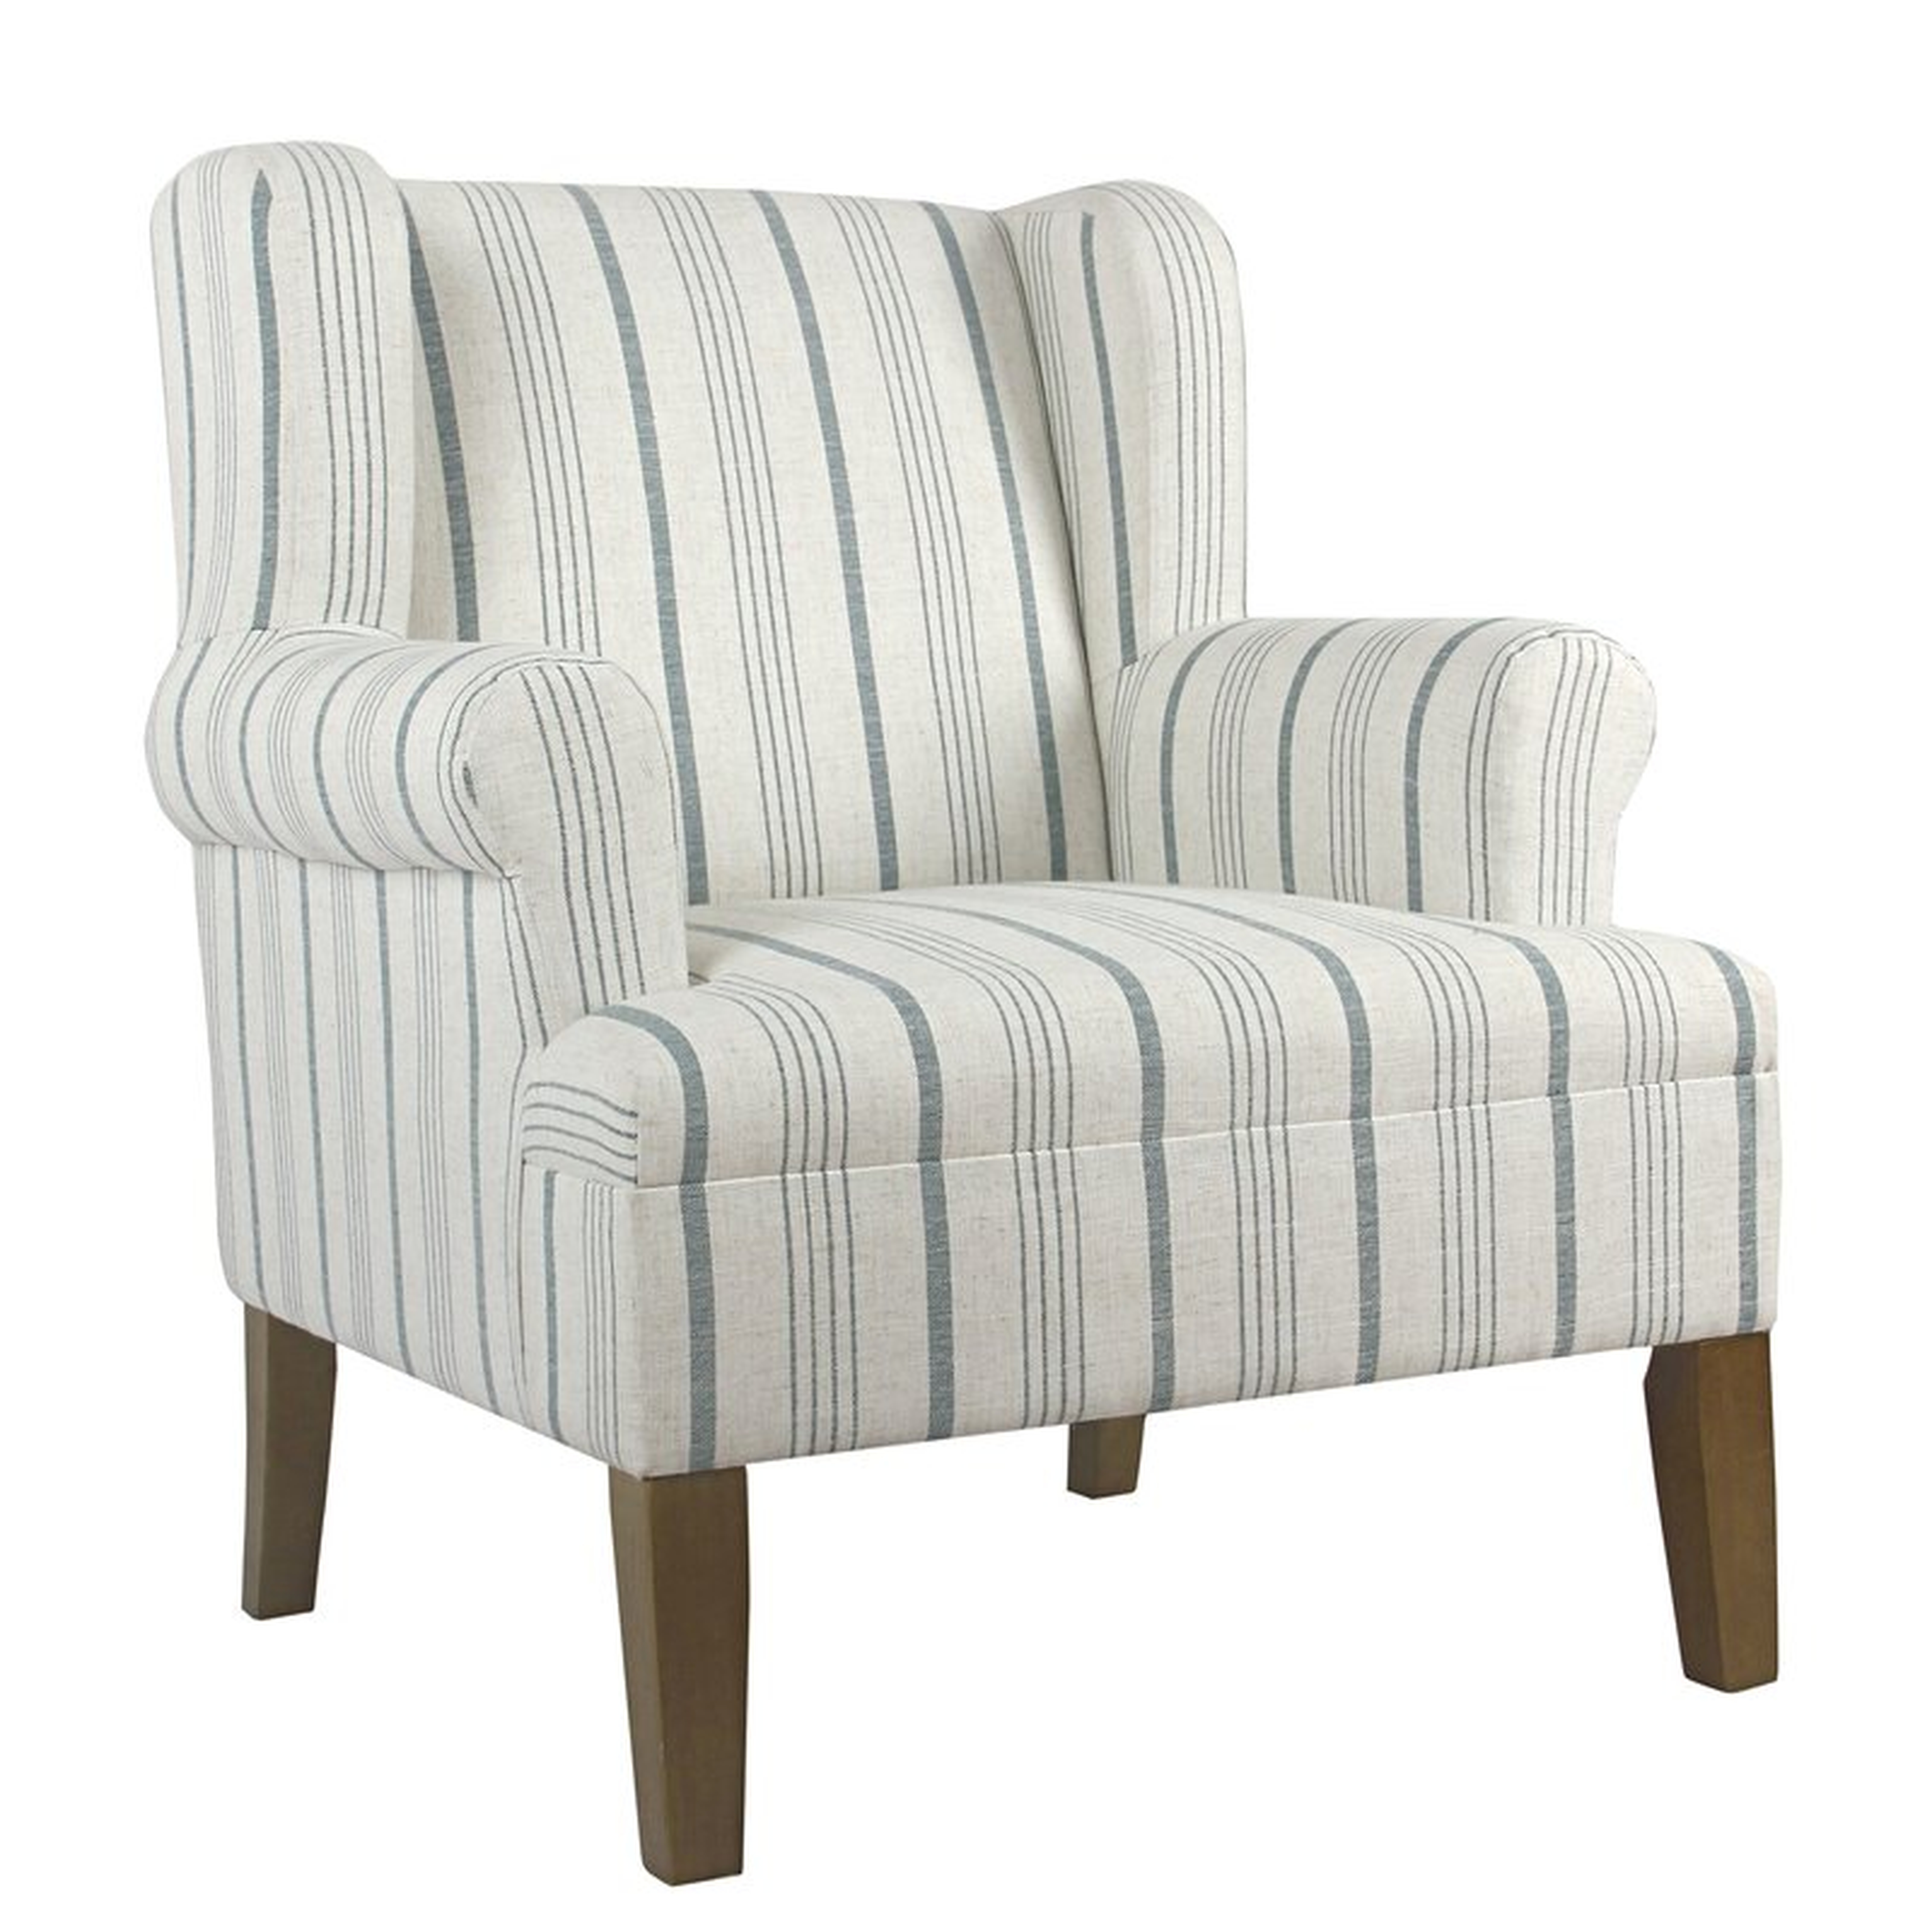 Atkinson 31.5" Wide Polyester Wingback Chair - Wayfair